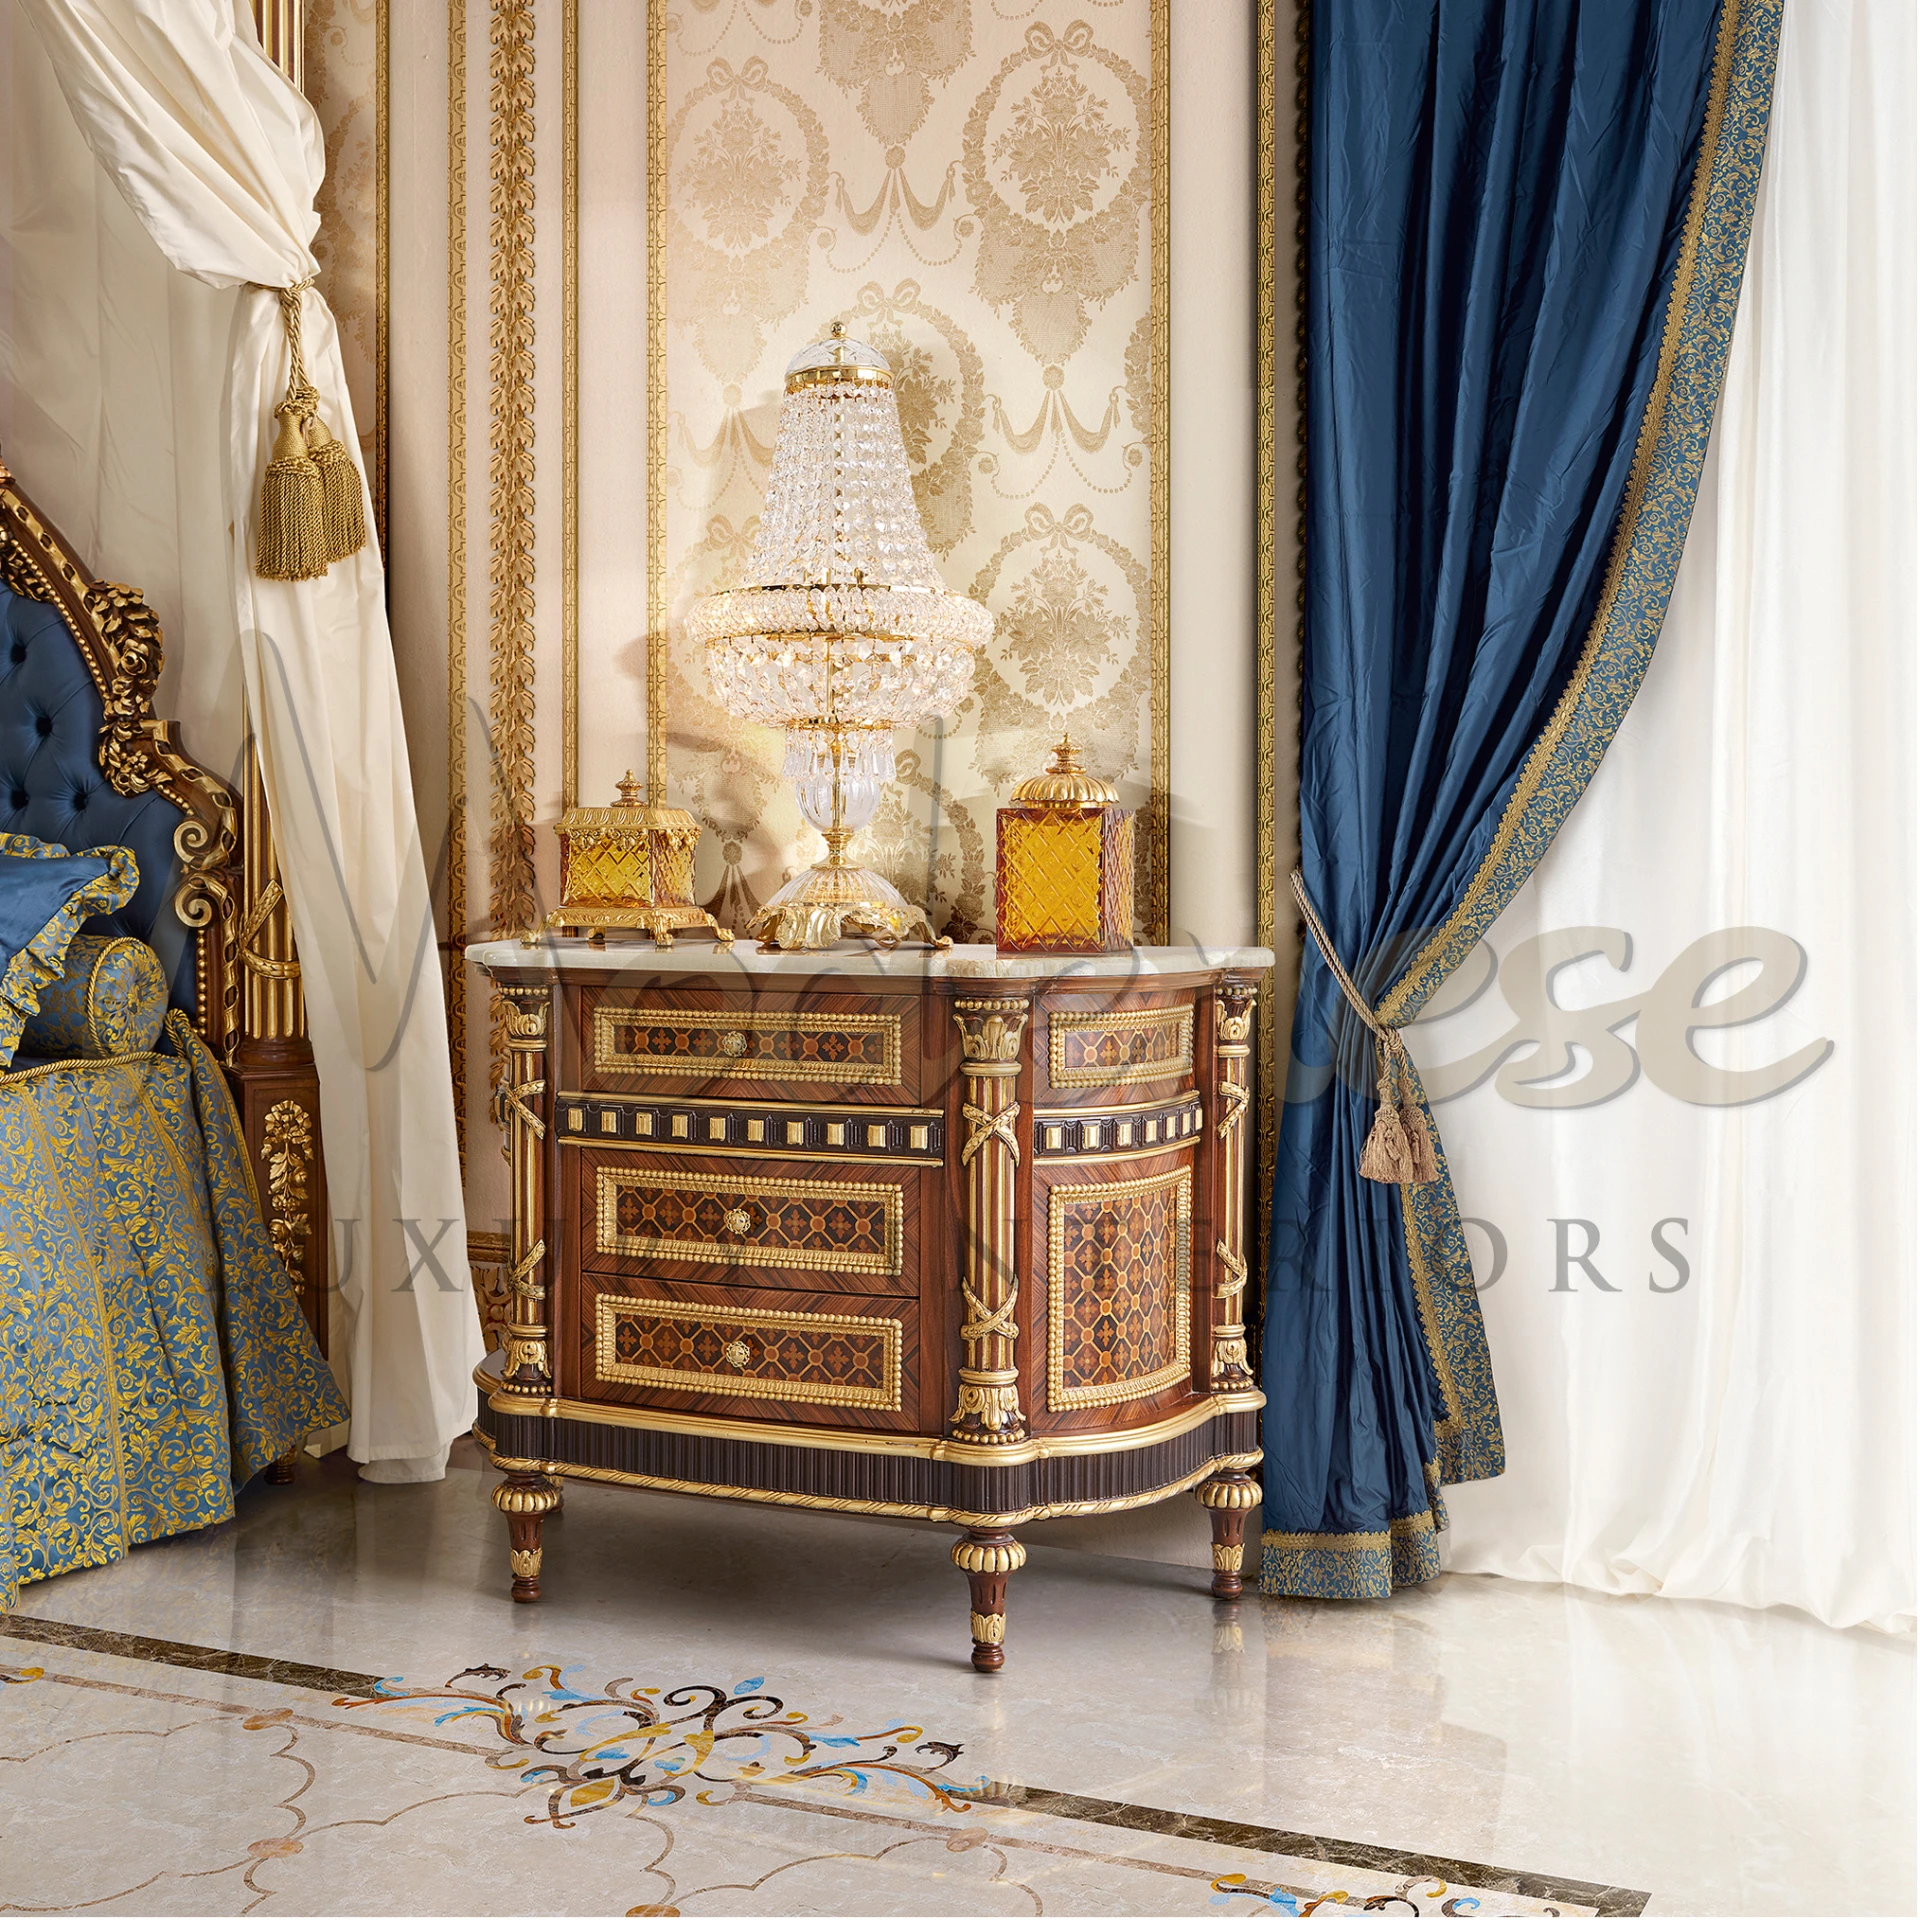 Intricate and elegant, this Italian design glass box adds a touch of sophistication to any luxury interior setting.